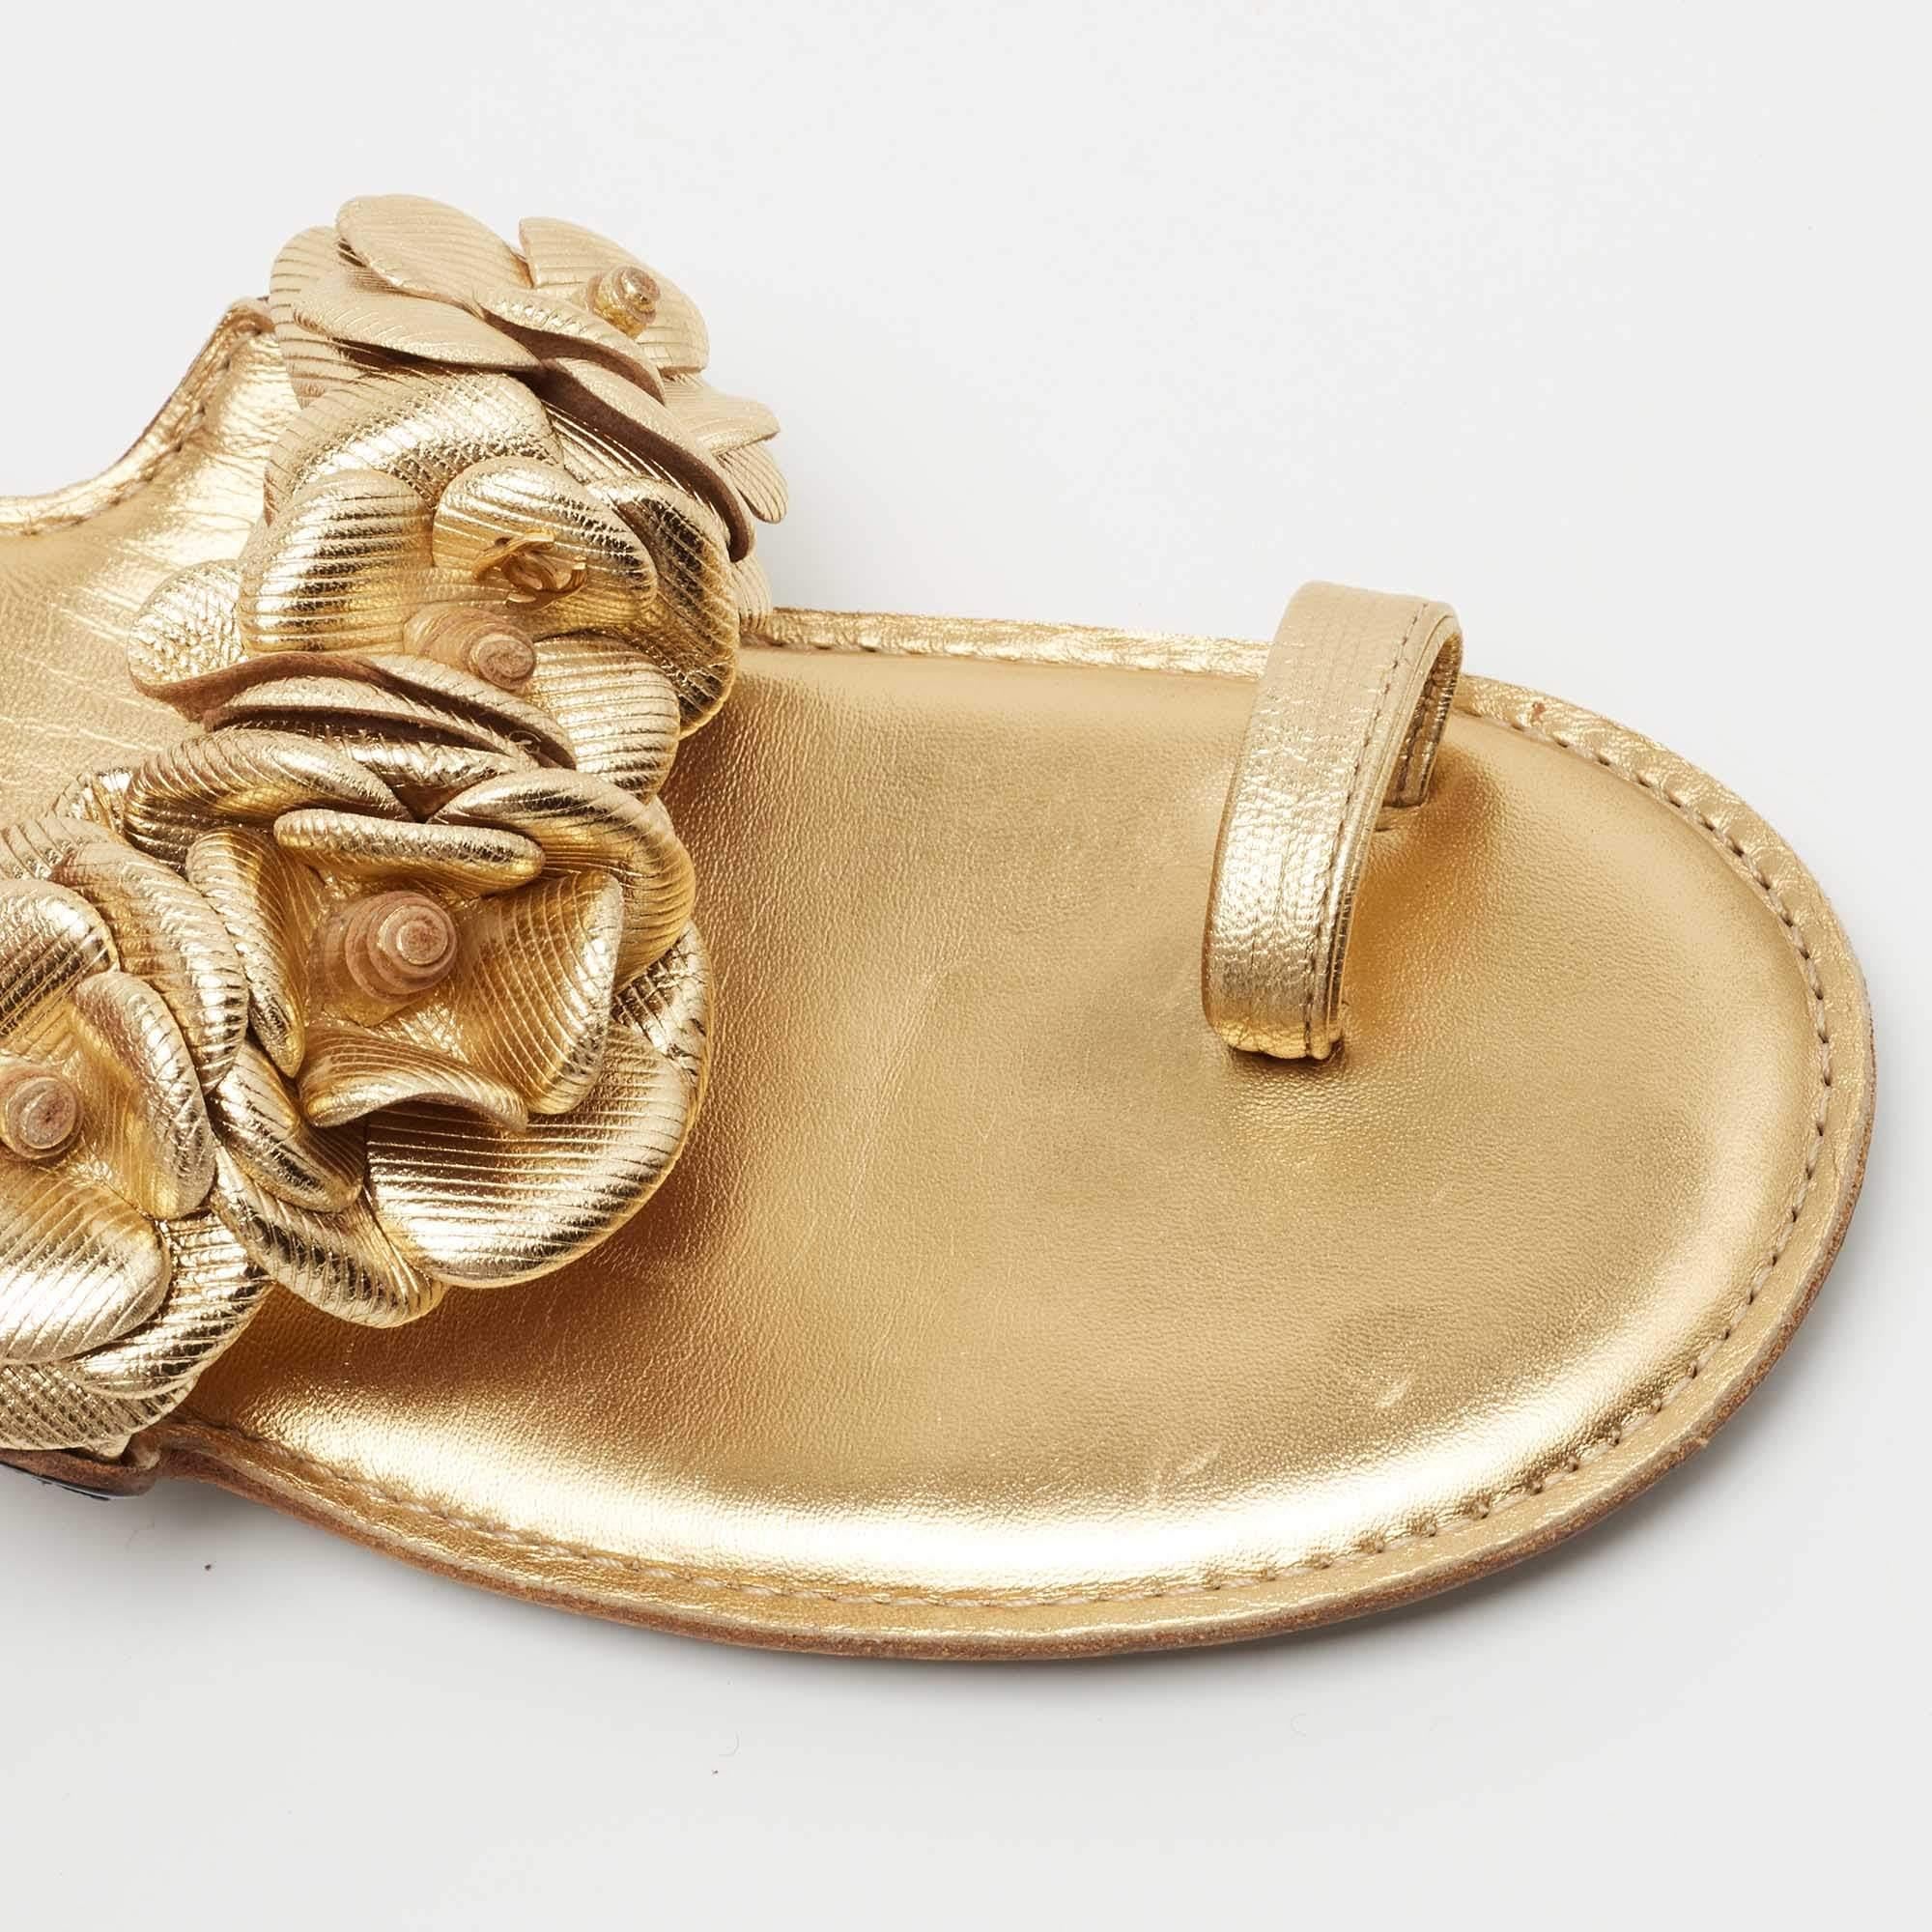 Chanel Gold Leather Camellia Toe Ring Sandals Size 36 2